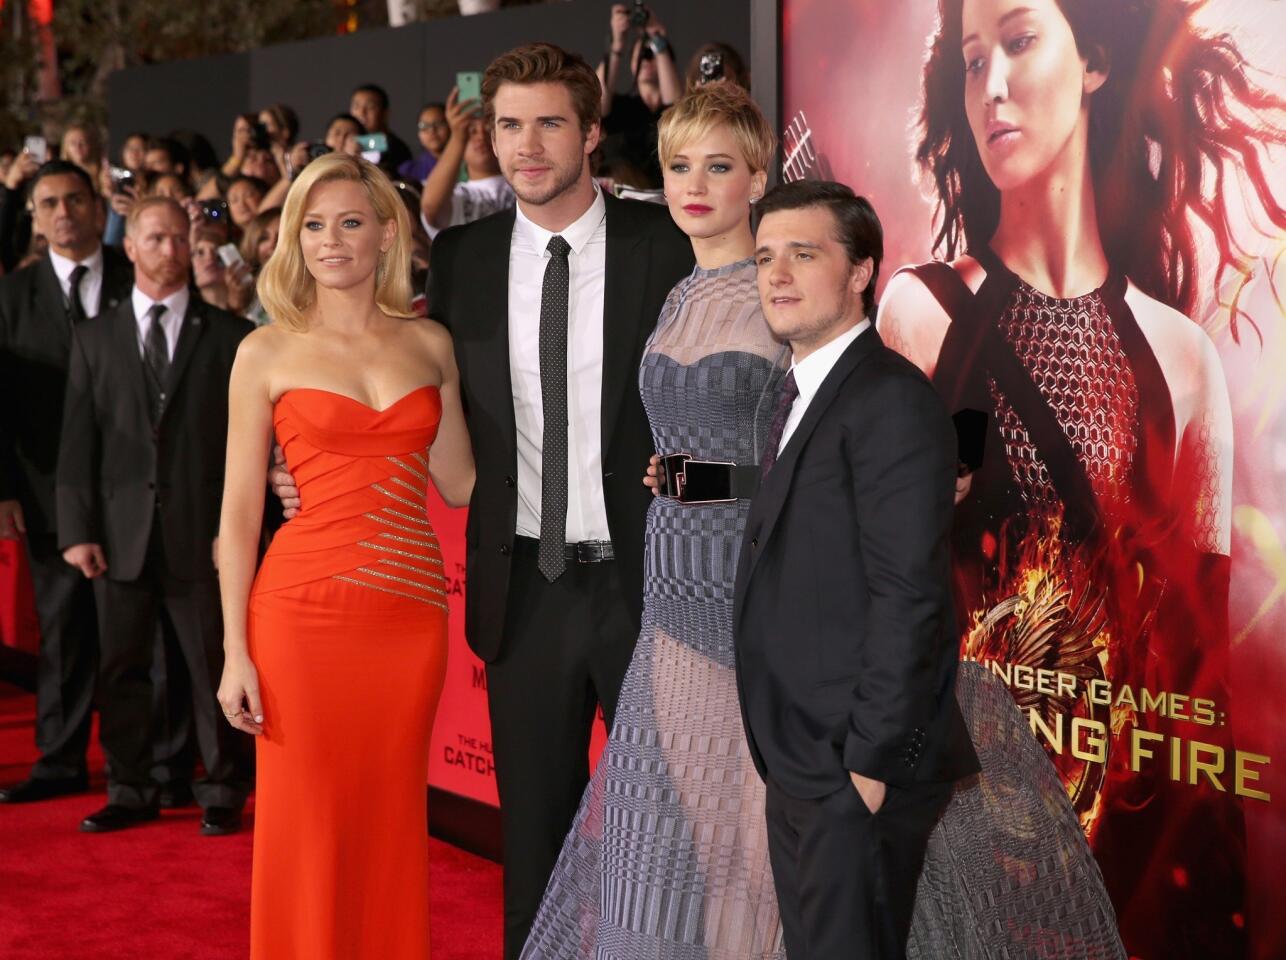 The Hunger Games: Catching Fire” LA Premiere